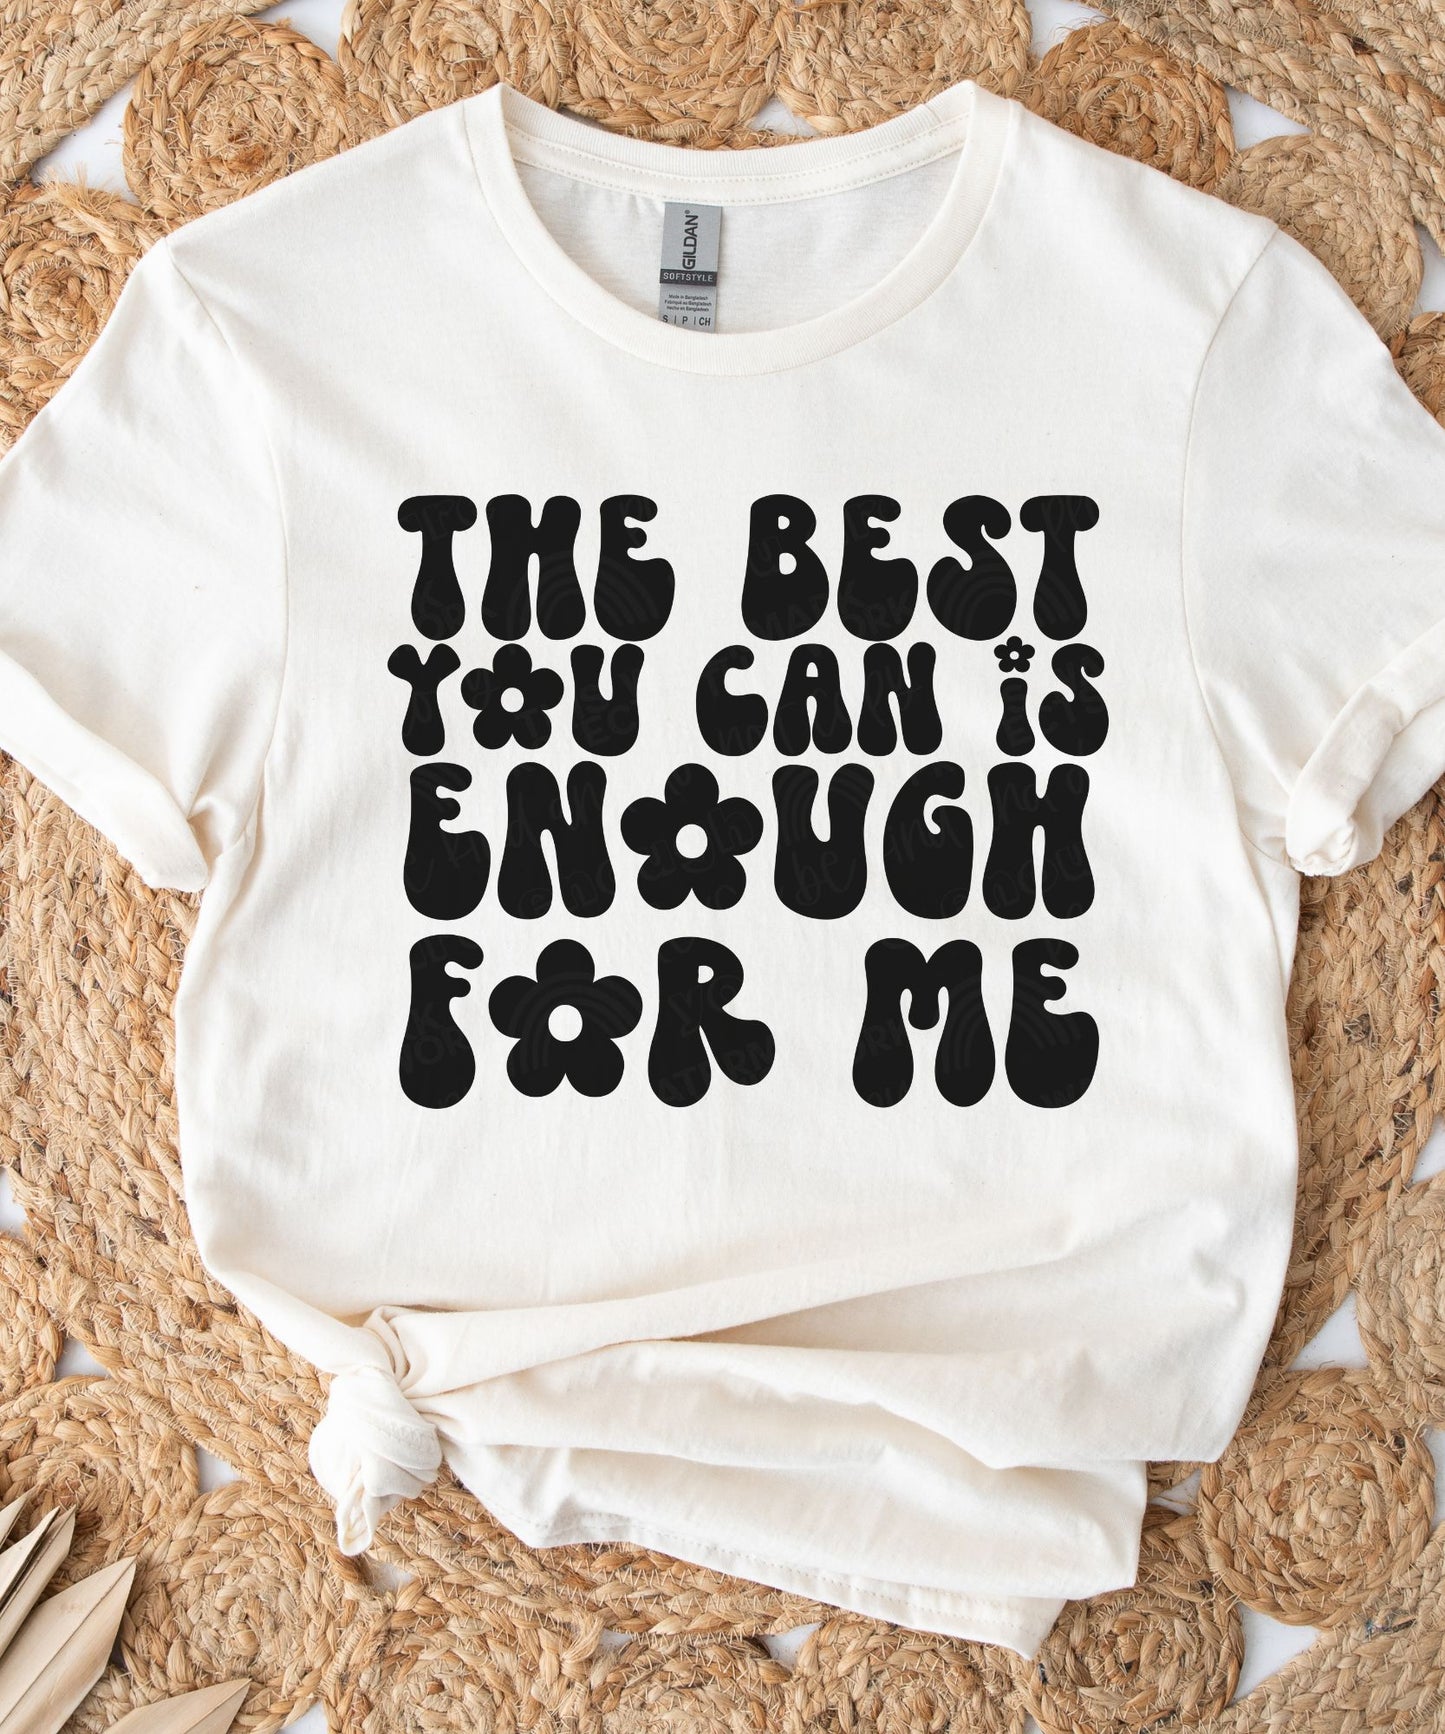 RTS - THE BEST YOU CAN IS ENOUGH FOR ME - ADULT SCREEN PRINT TRANSFER